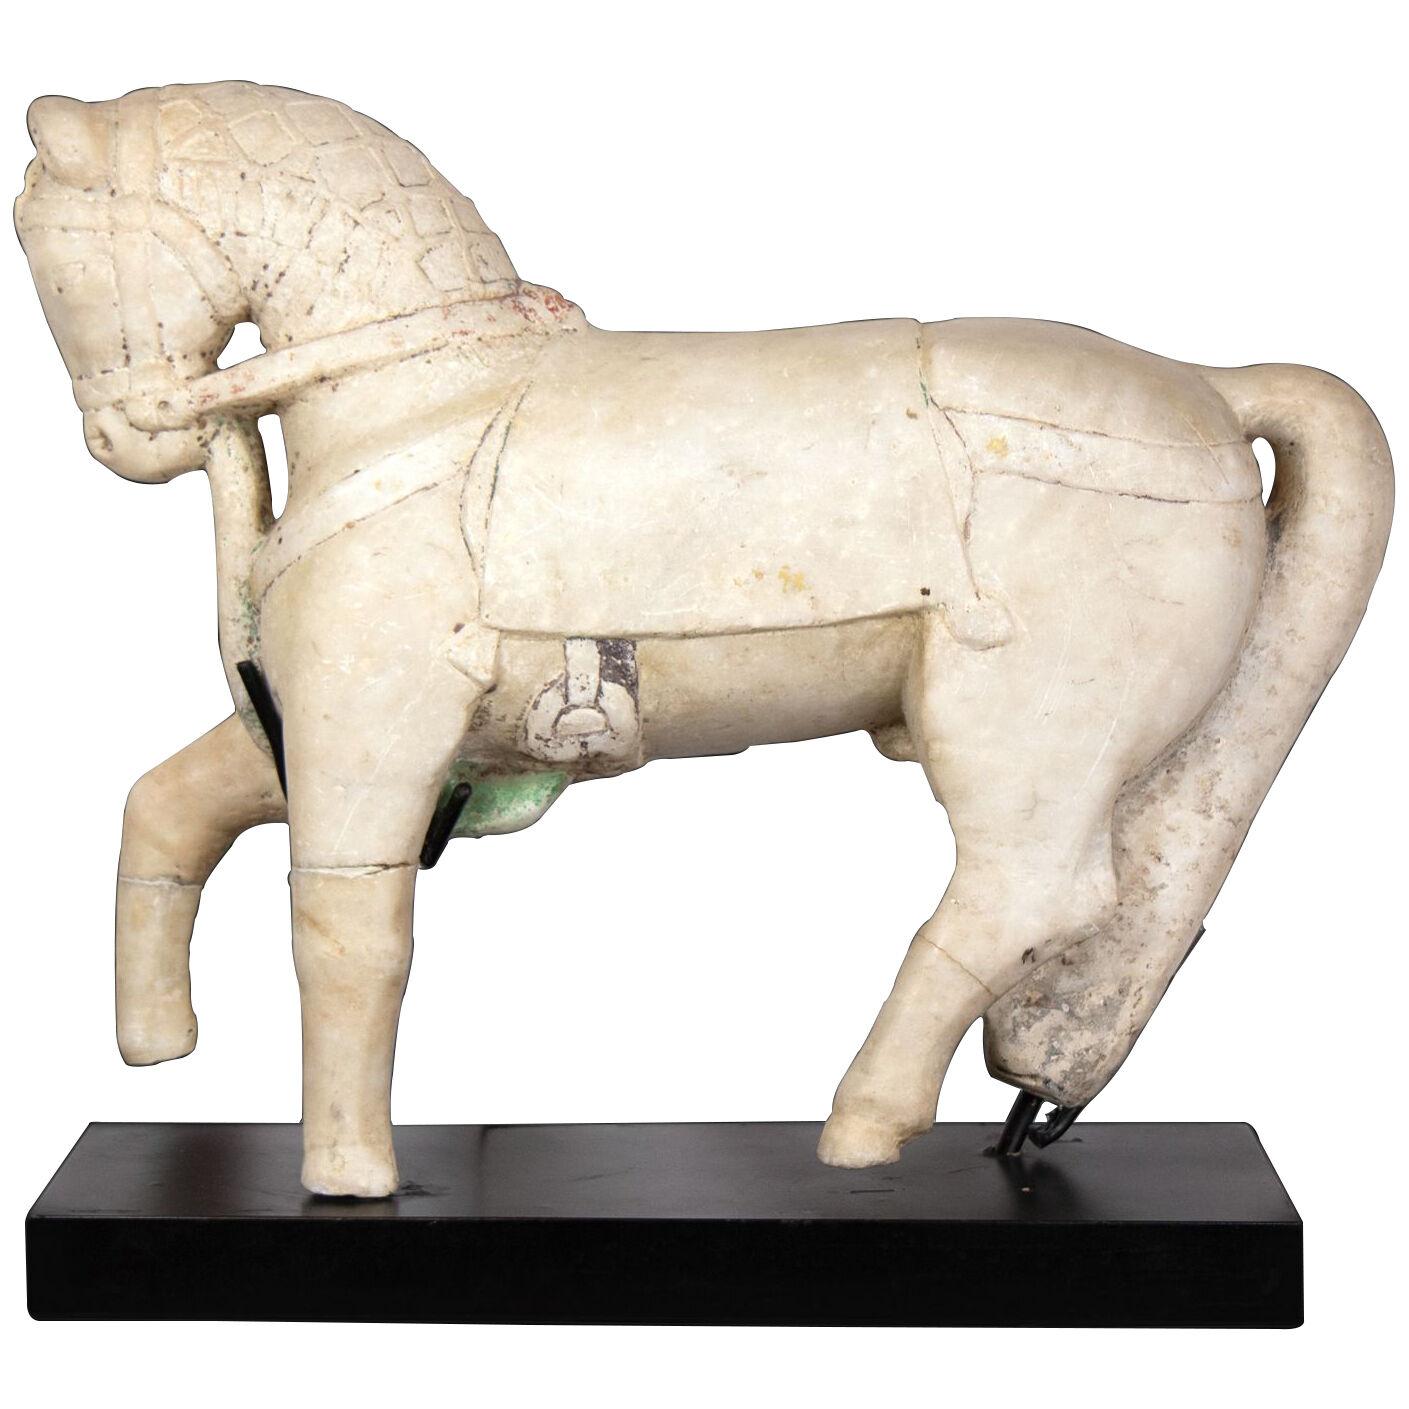 An Exquisite Carved Alabaster Horse On Stand; Rajasthan, Circa 1720.